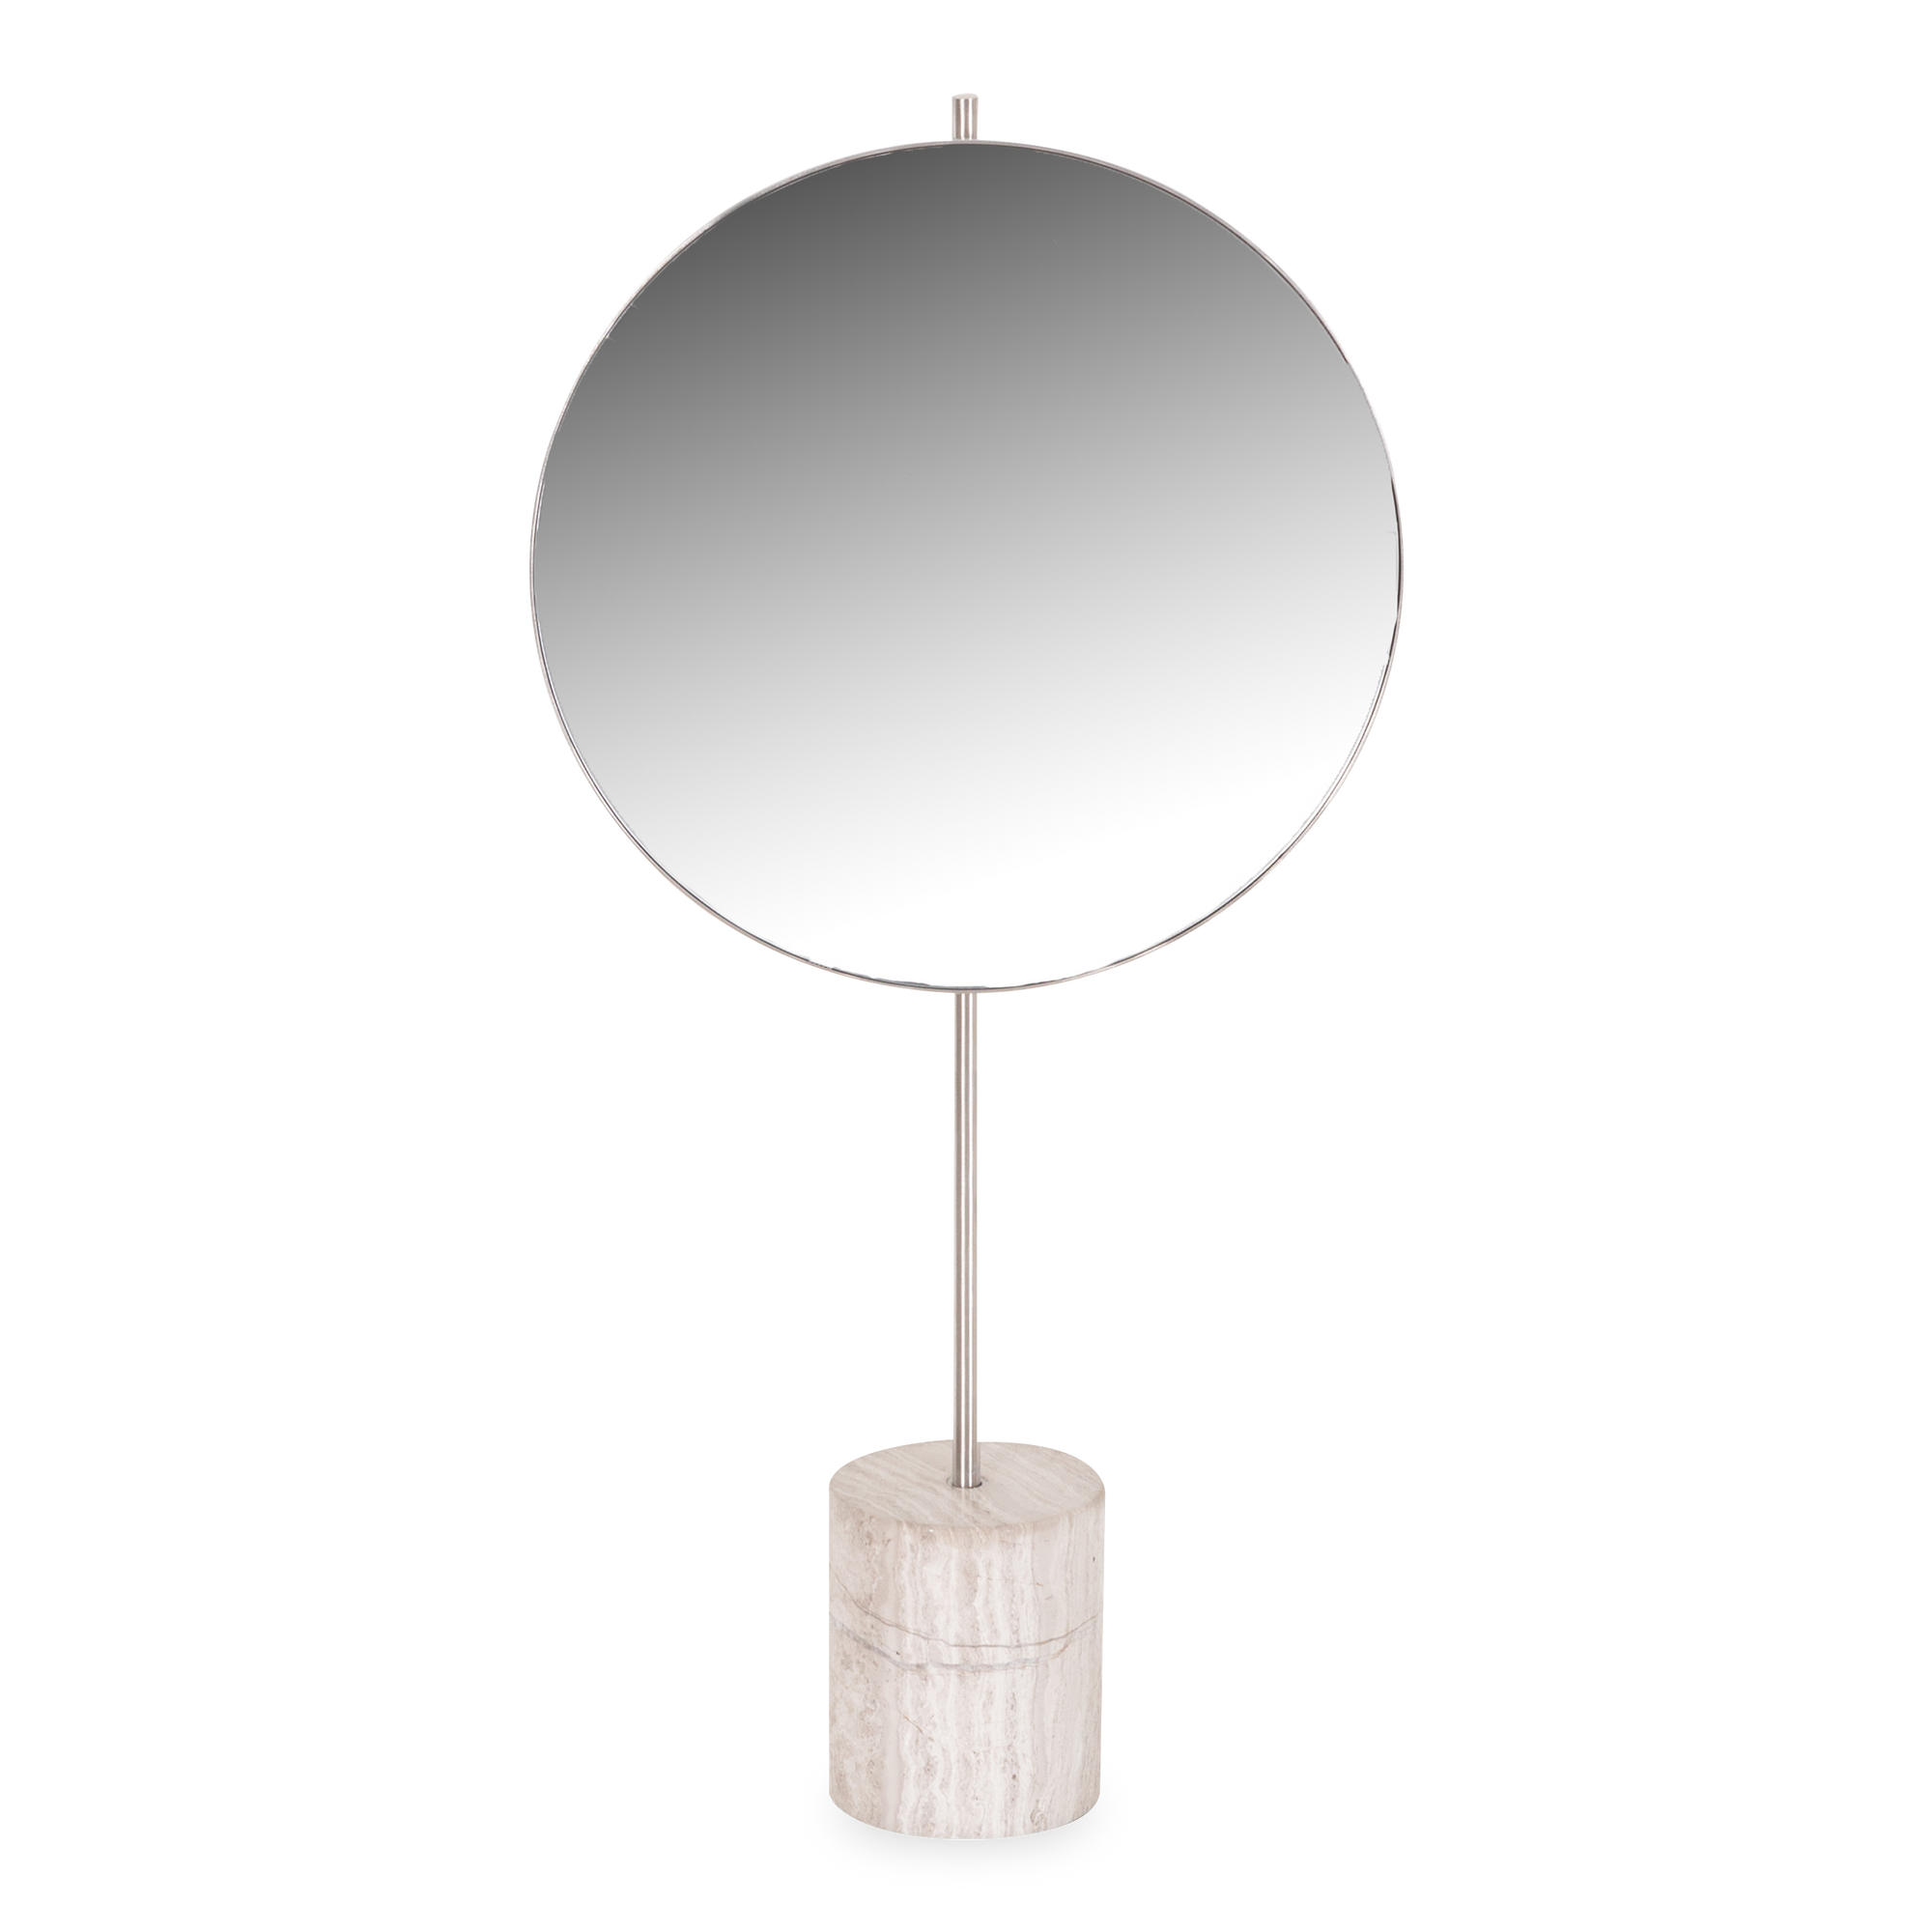 The Marble Vanity Mirror was designed to be beautiful with a practical purpose.